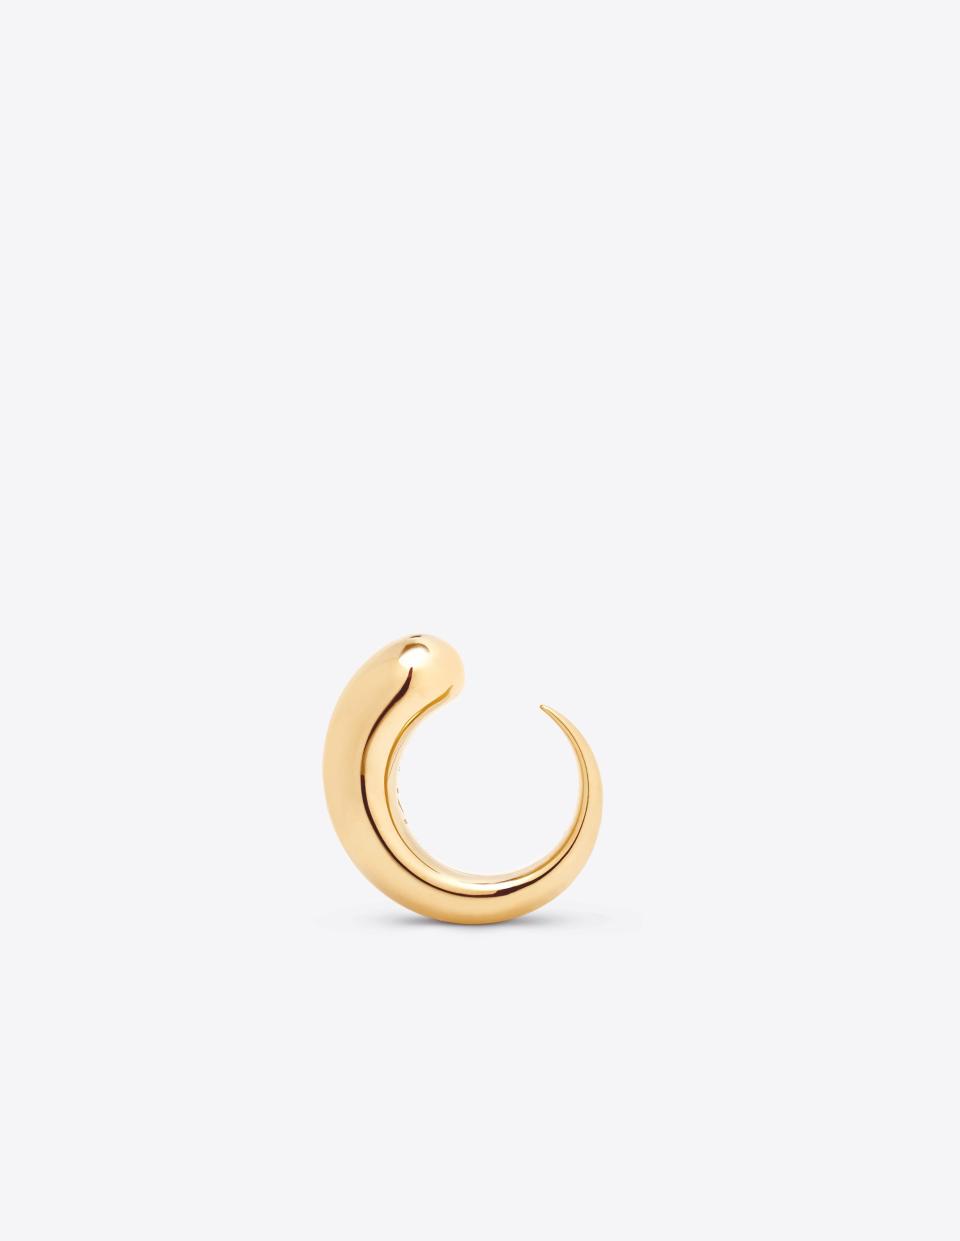 <p><strong>Khiry</strong></p><p>khiry.com</p><p><strong>$365.00</strong></p><p>"I fell in love with the Khiry Khartoum ring the moment I laid my eyes on them. The 18Kgold polished curvy sleek design is minimal and timeless." — <em>Prakash Servai, Fashion Assistant</em></p>